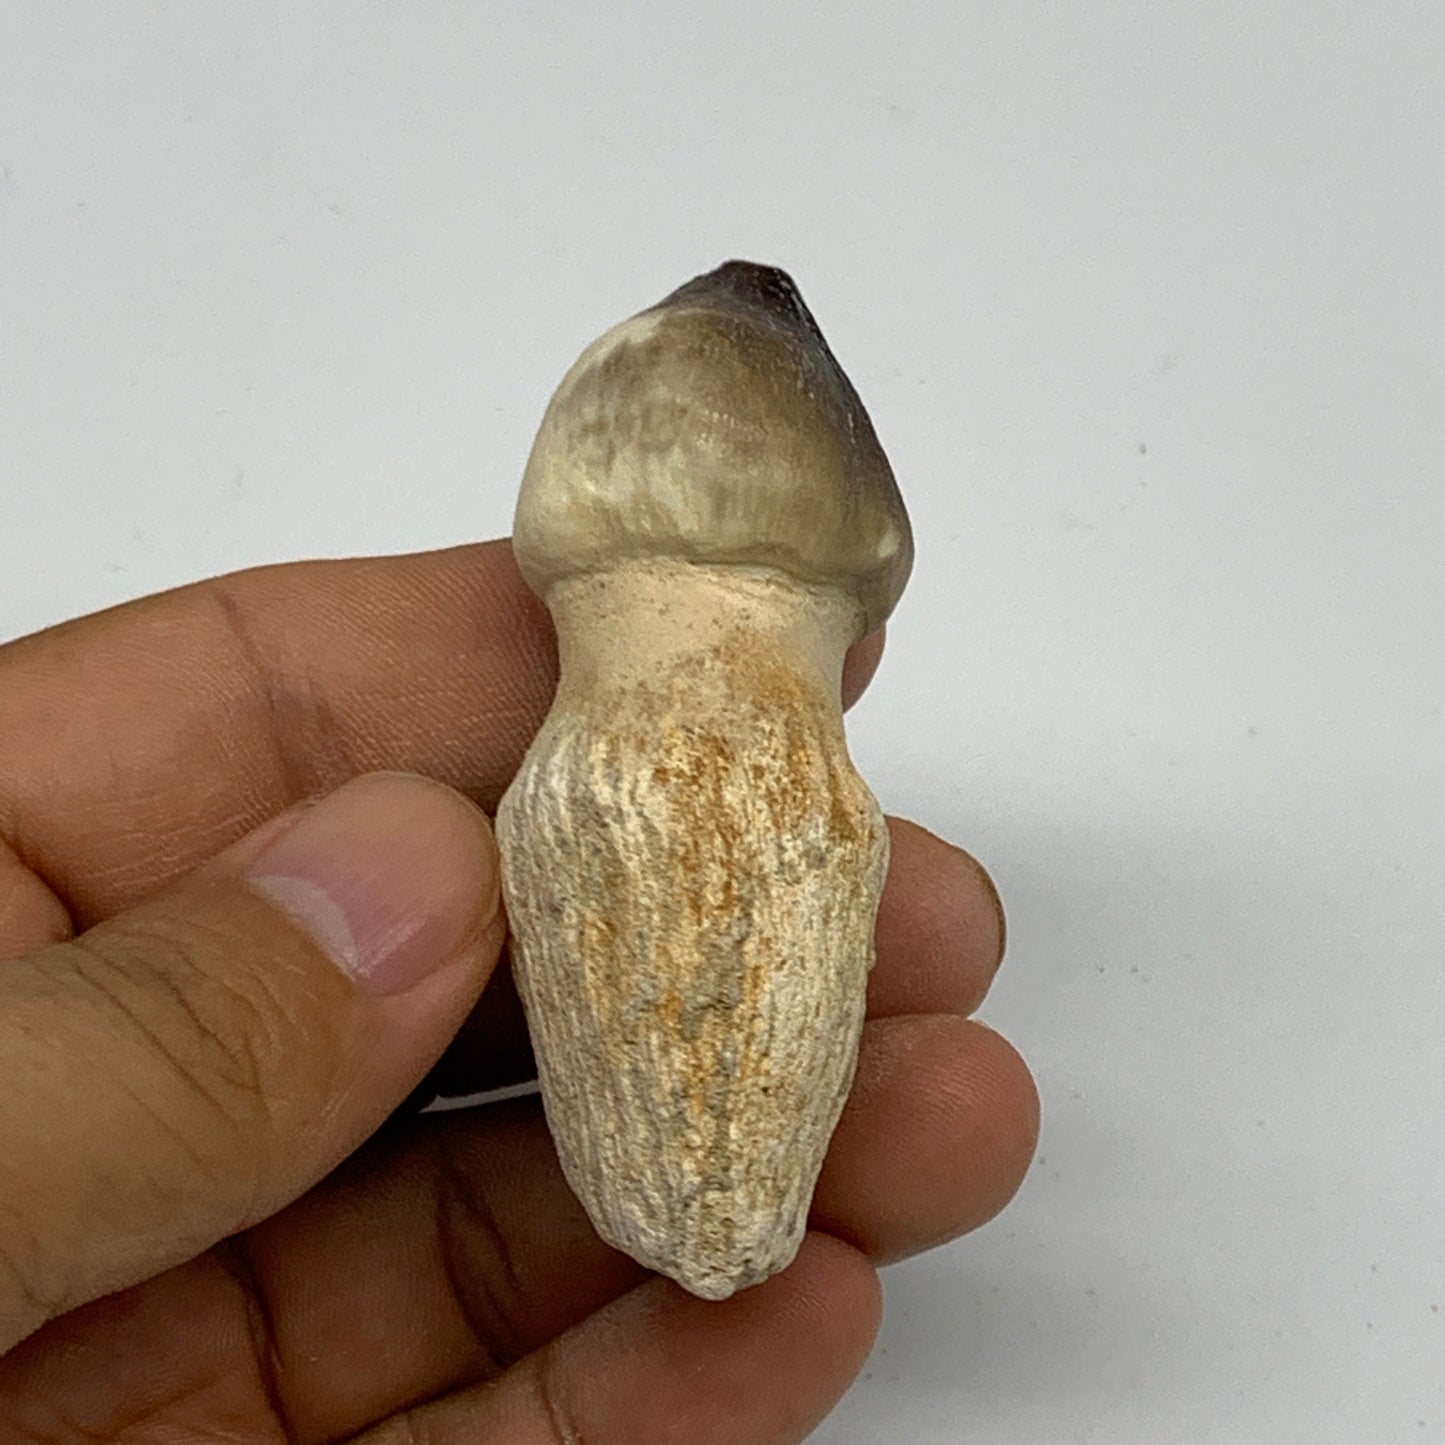 46.9g, 2.5"X1.4"x1" Fossil Globidens phosphaticus (Mosasaur ) Tooth, Cretaceous,